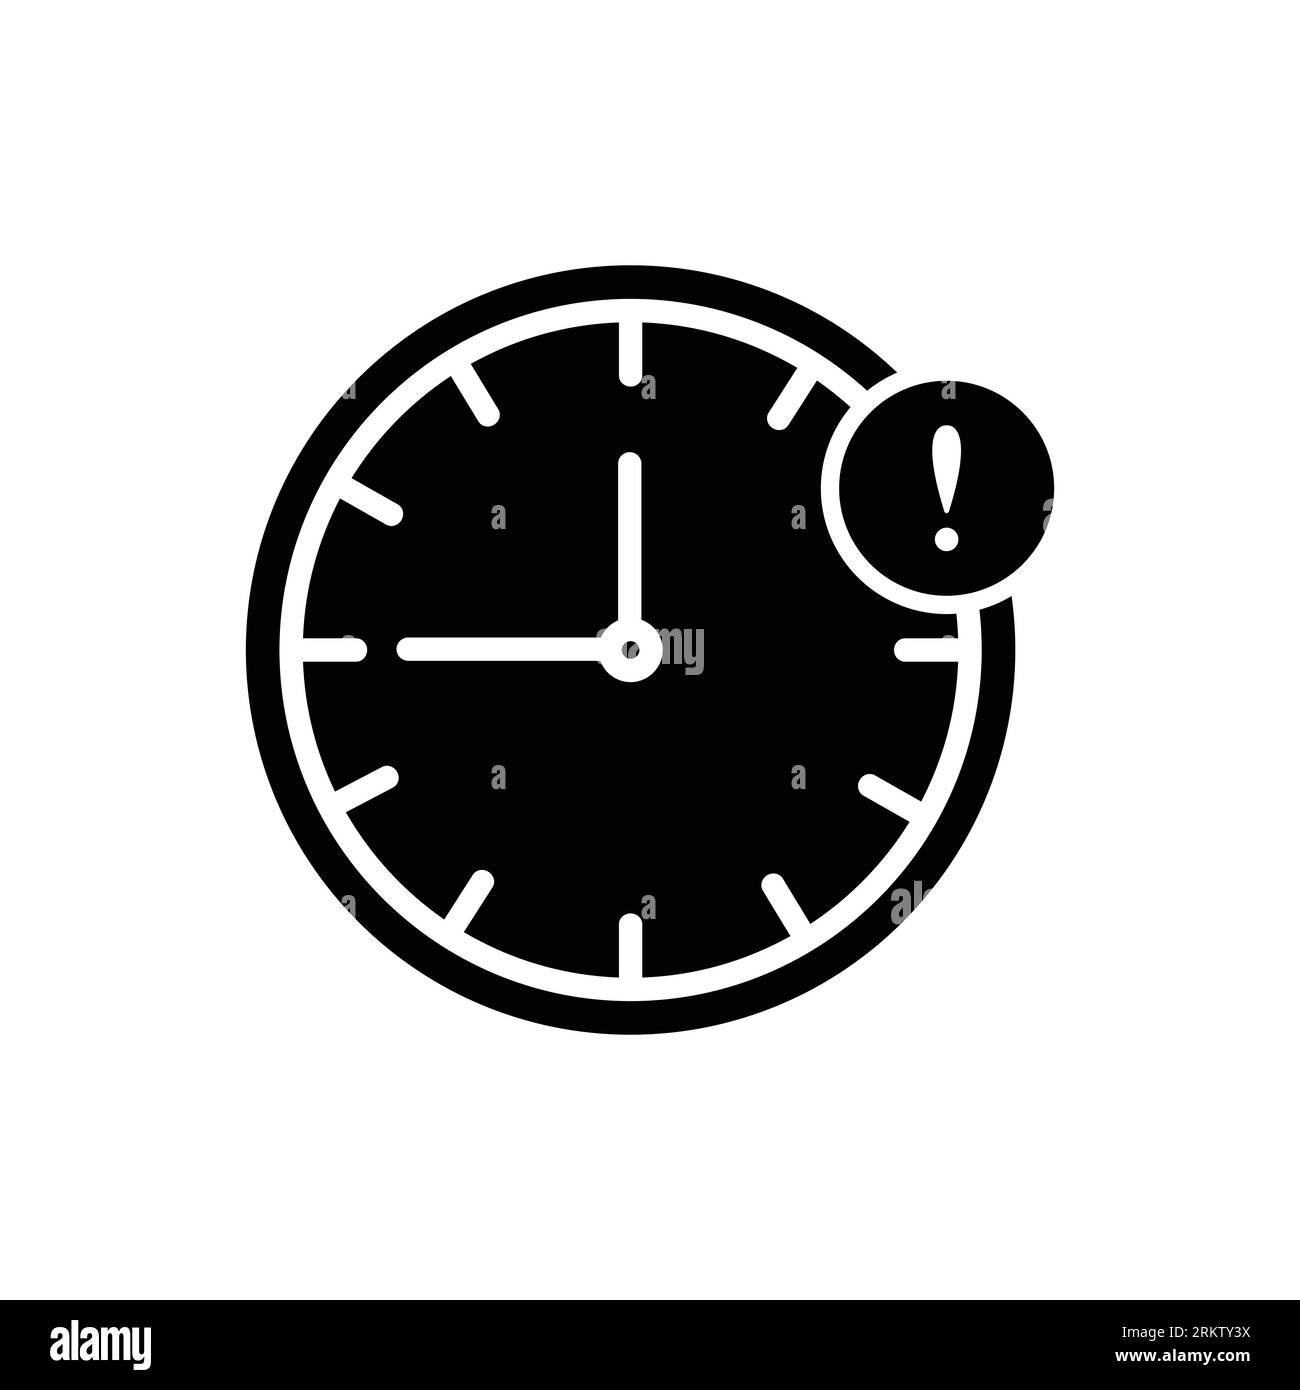 Time delay icon in trendy silhouette style design. Vector illustration isolated on white background. Stock Vector